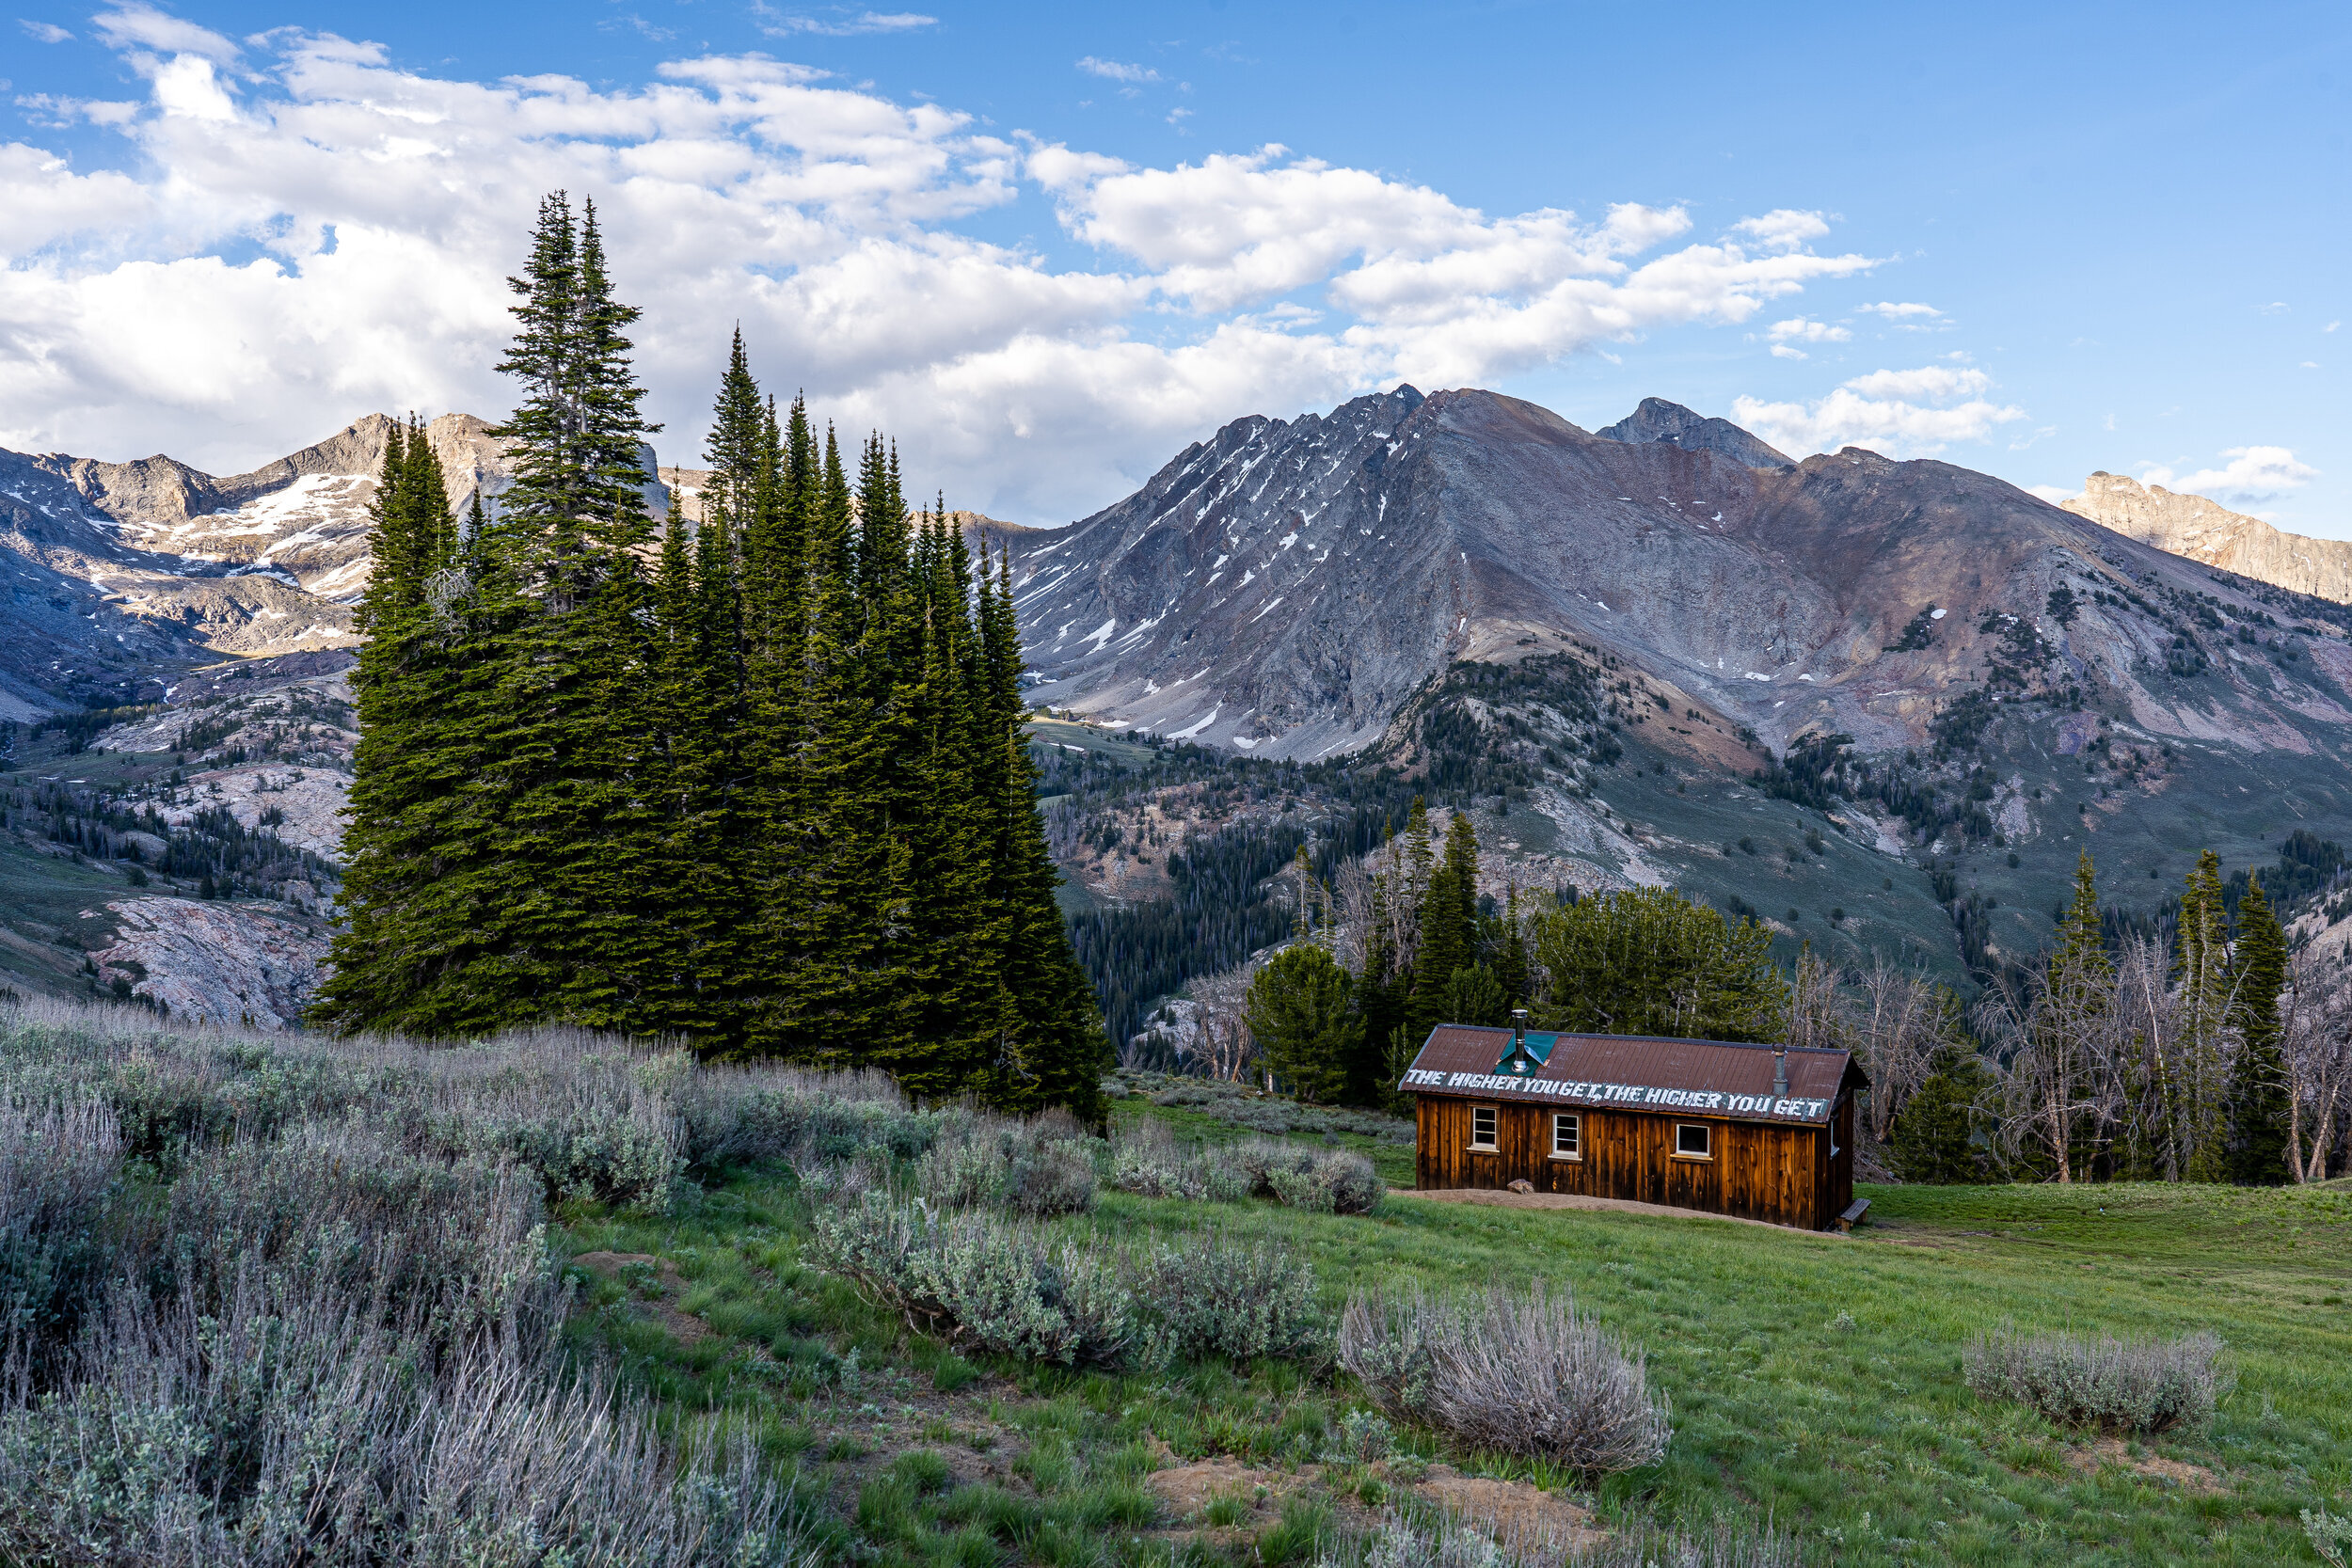    The Higher You Get, The Higher You Get   This first-come, first-served cabin in the area is open for any group of hikers to stay overnight. Craig found the door unlocked and instructional notes hung everywhere for managing the amenities, including